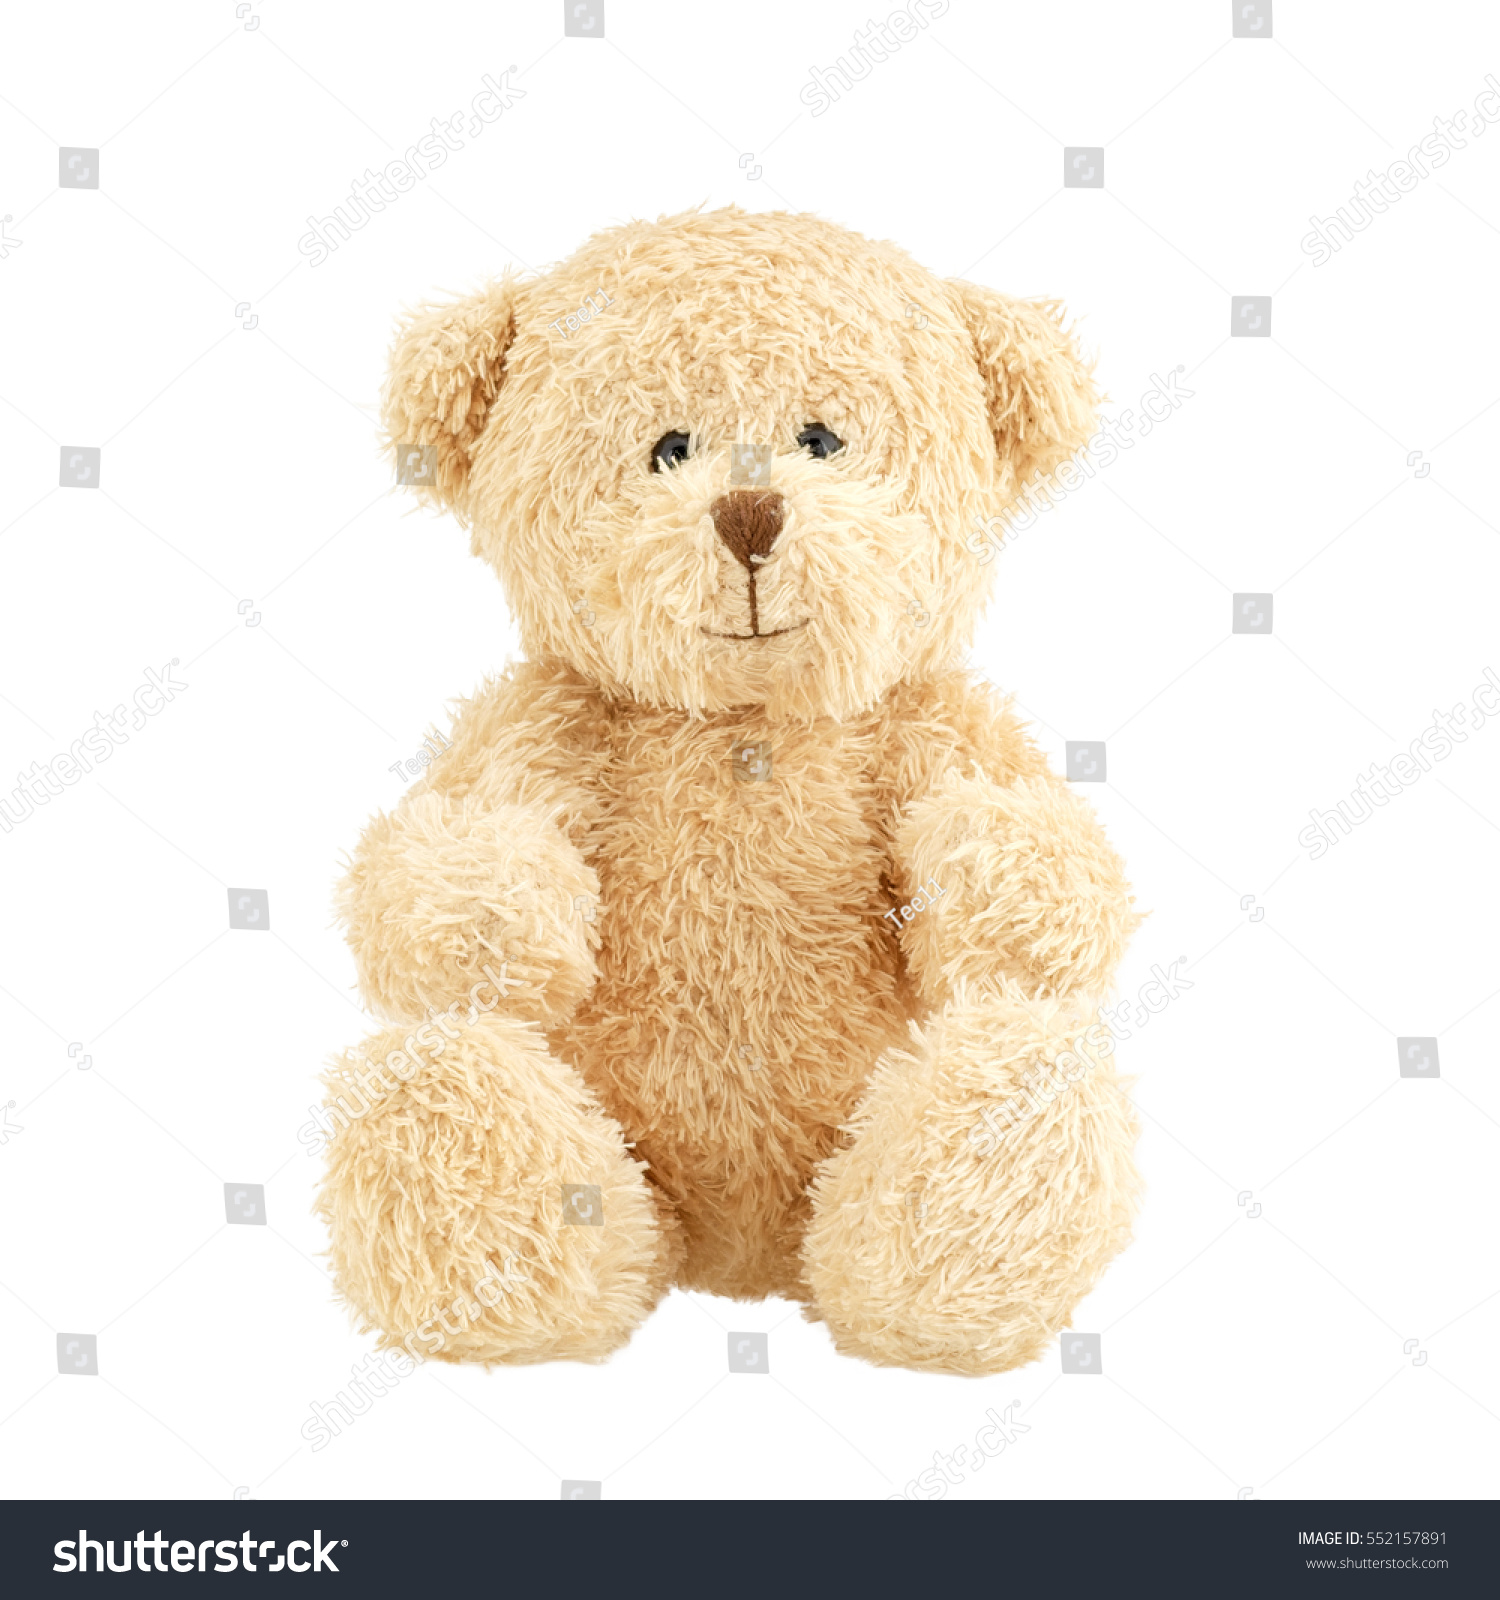 Light brown teddy bear isolated on white background. #552157891